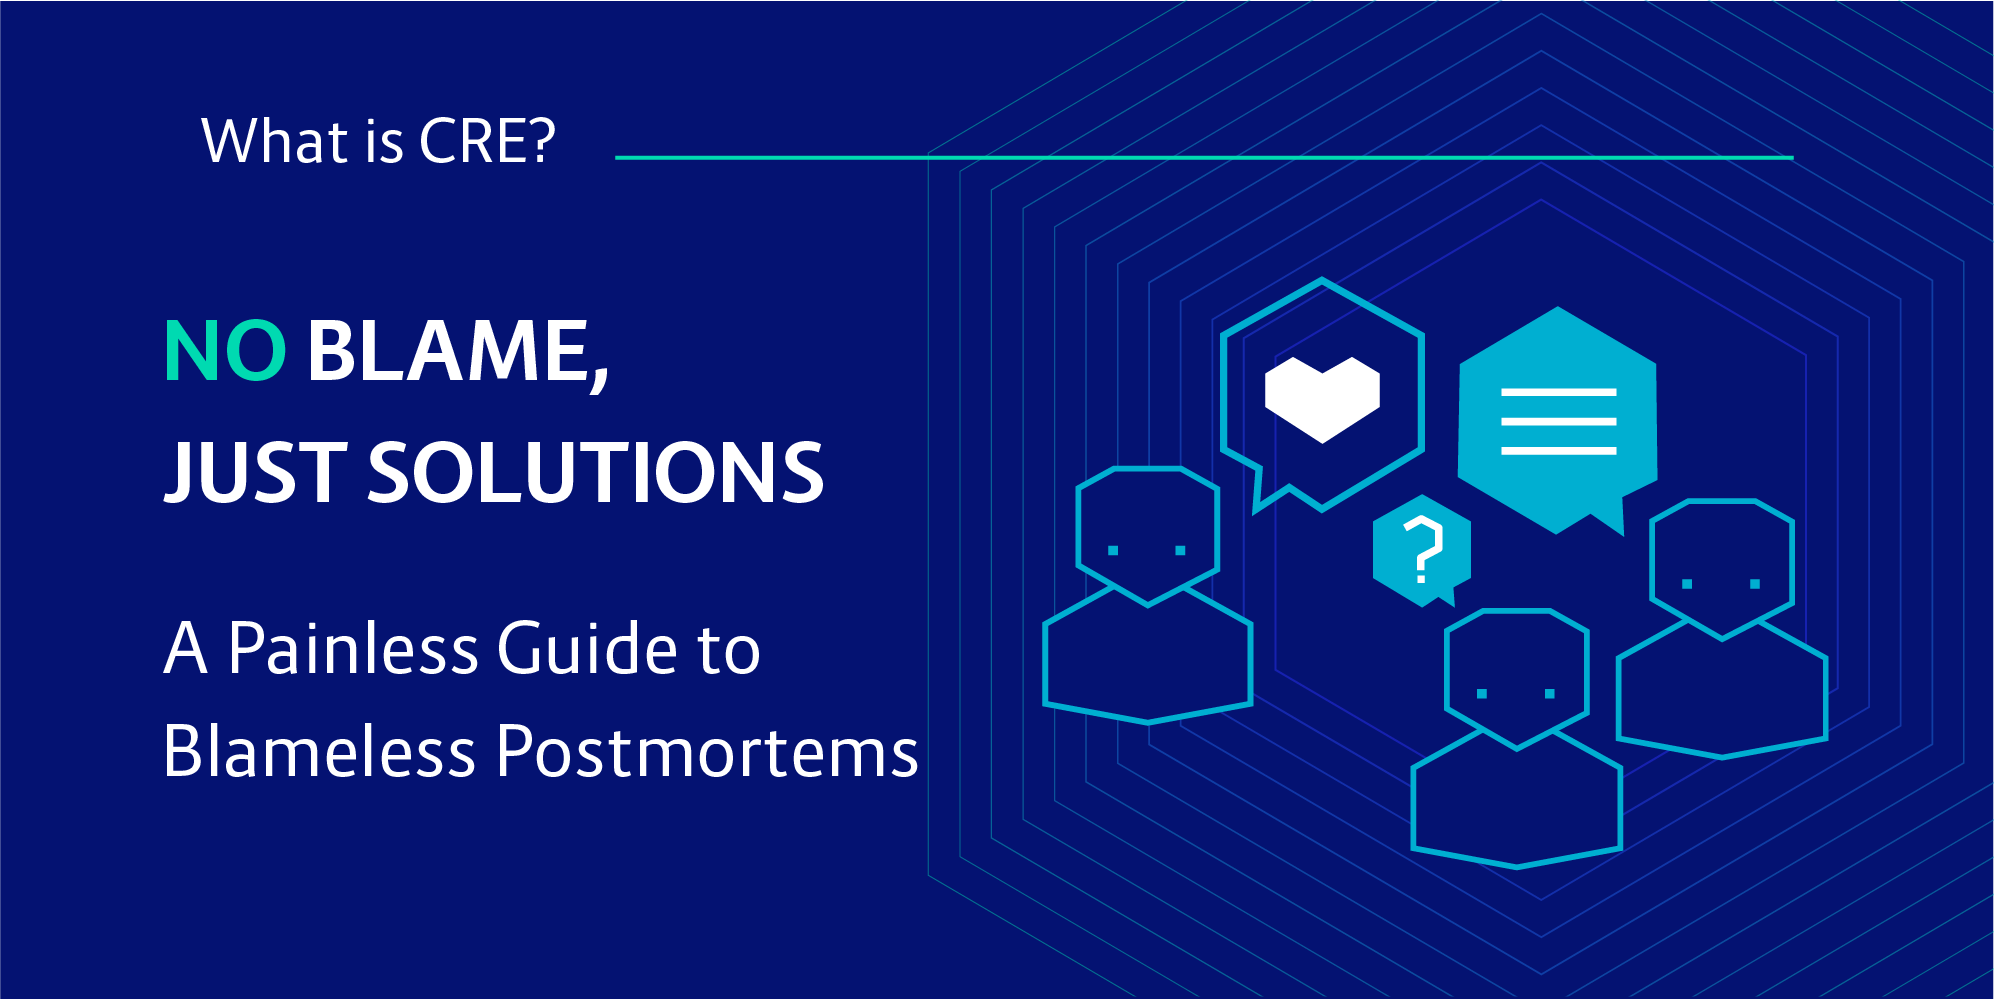 A Painless Guide to Blameless Postmortems